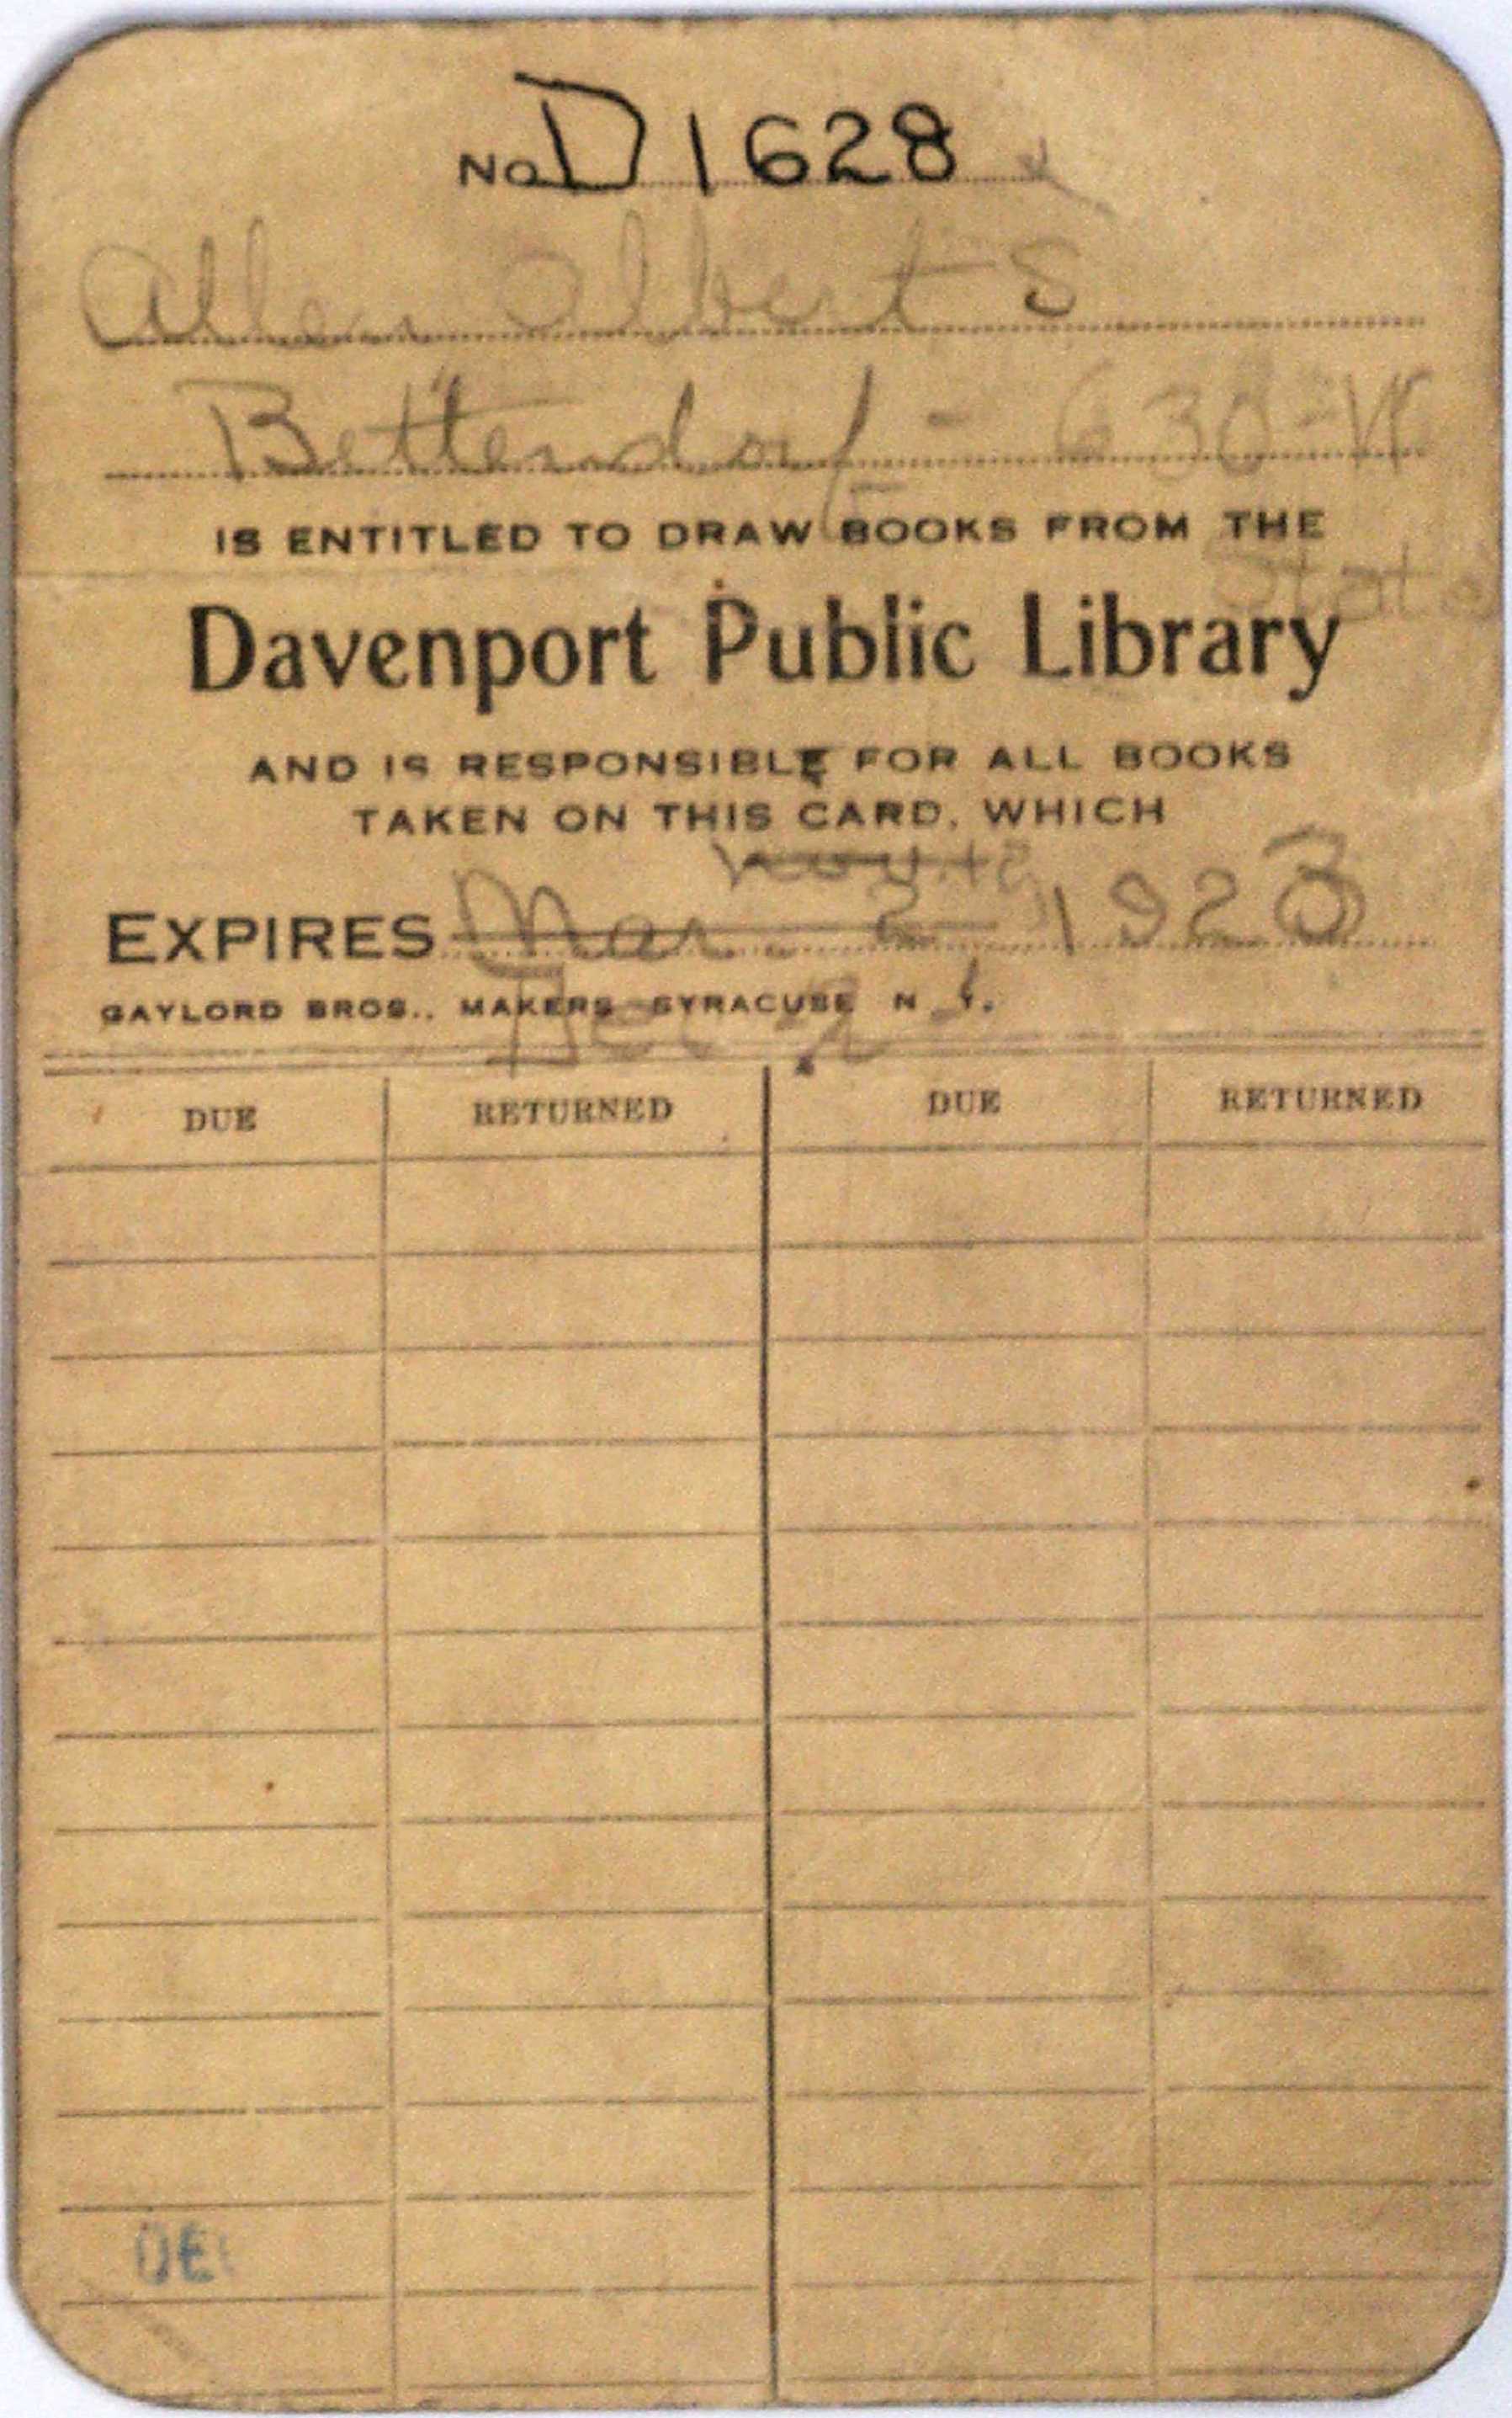 library-cards-we-have-known-primary-selections-from-special-collections